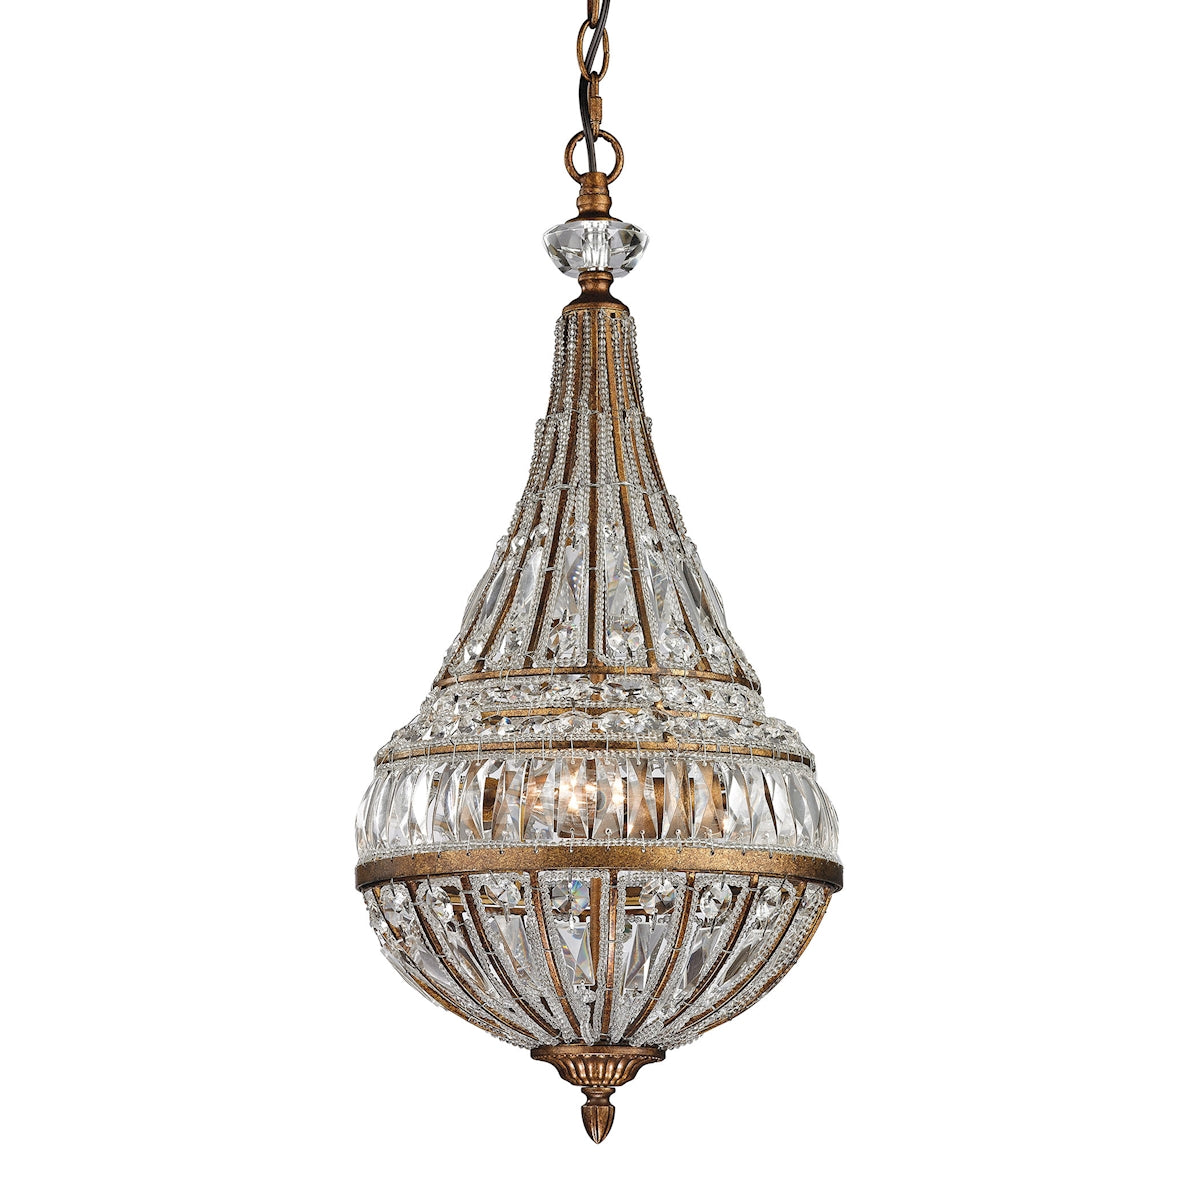 ELK Lighting 46046/3 Empire 3-Light Mini Pendant in Mocha with Crystal and Glass Beads